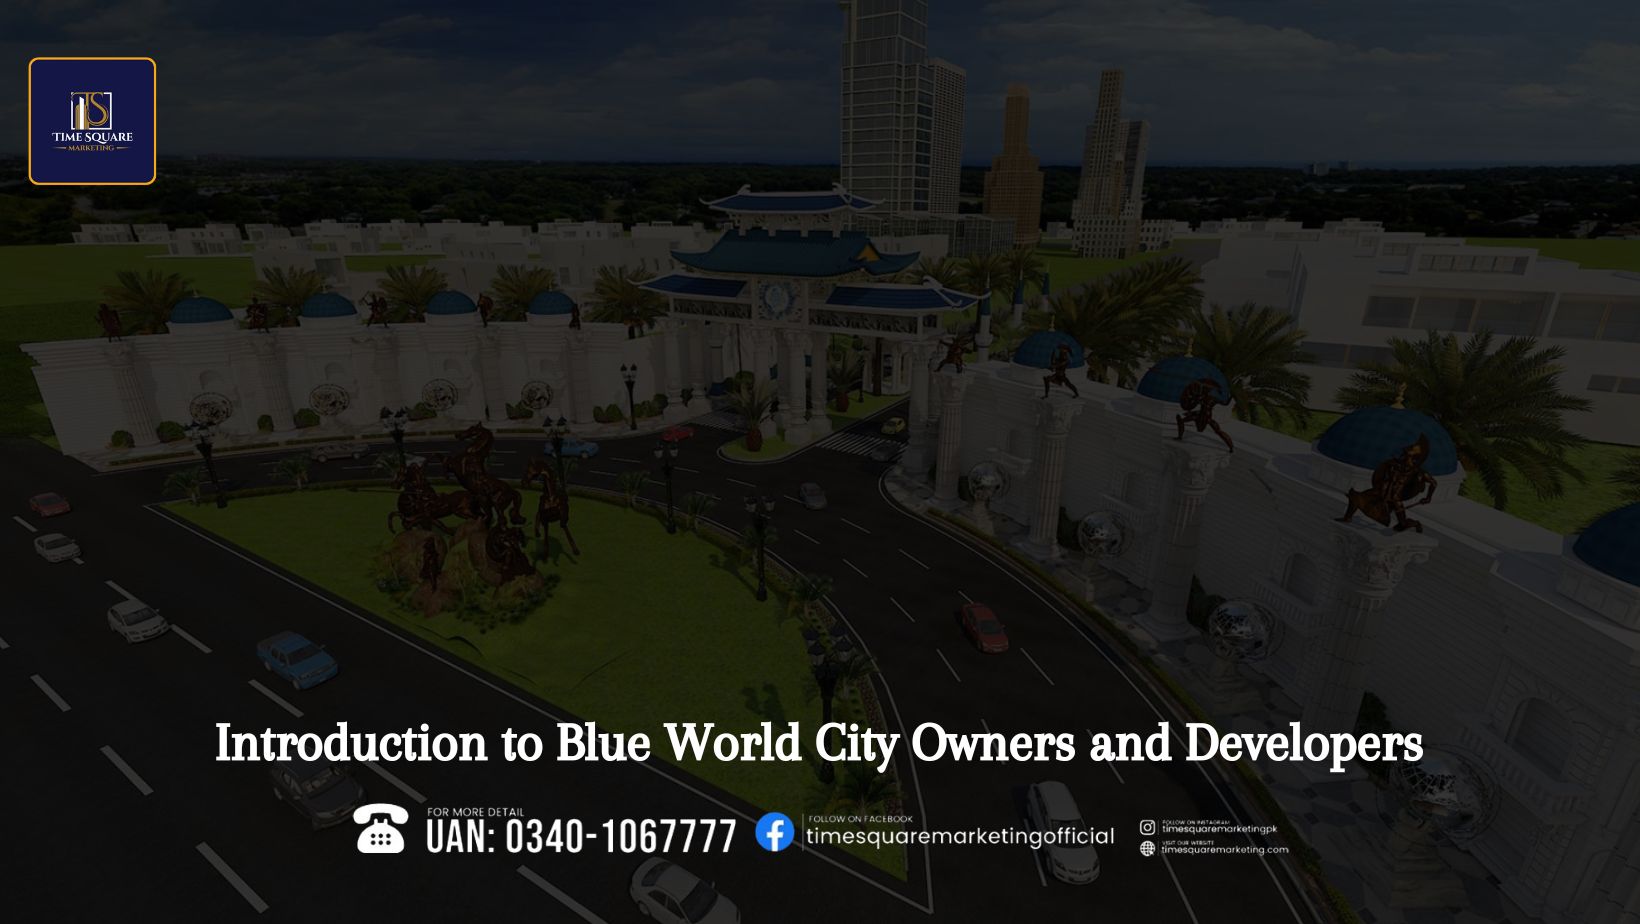 Blue World City Owners and Developers